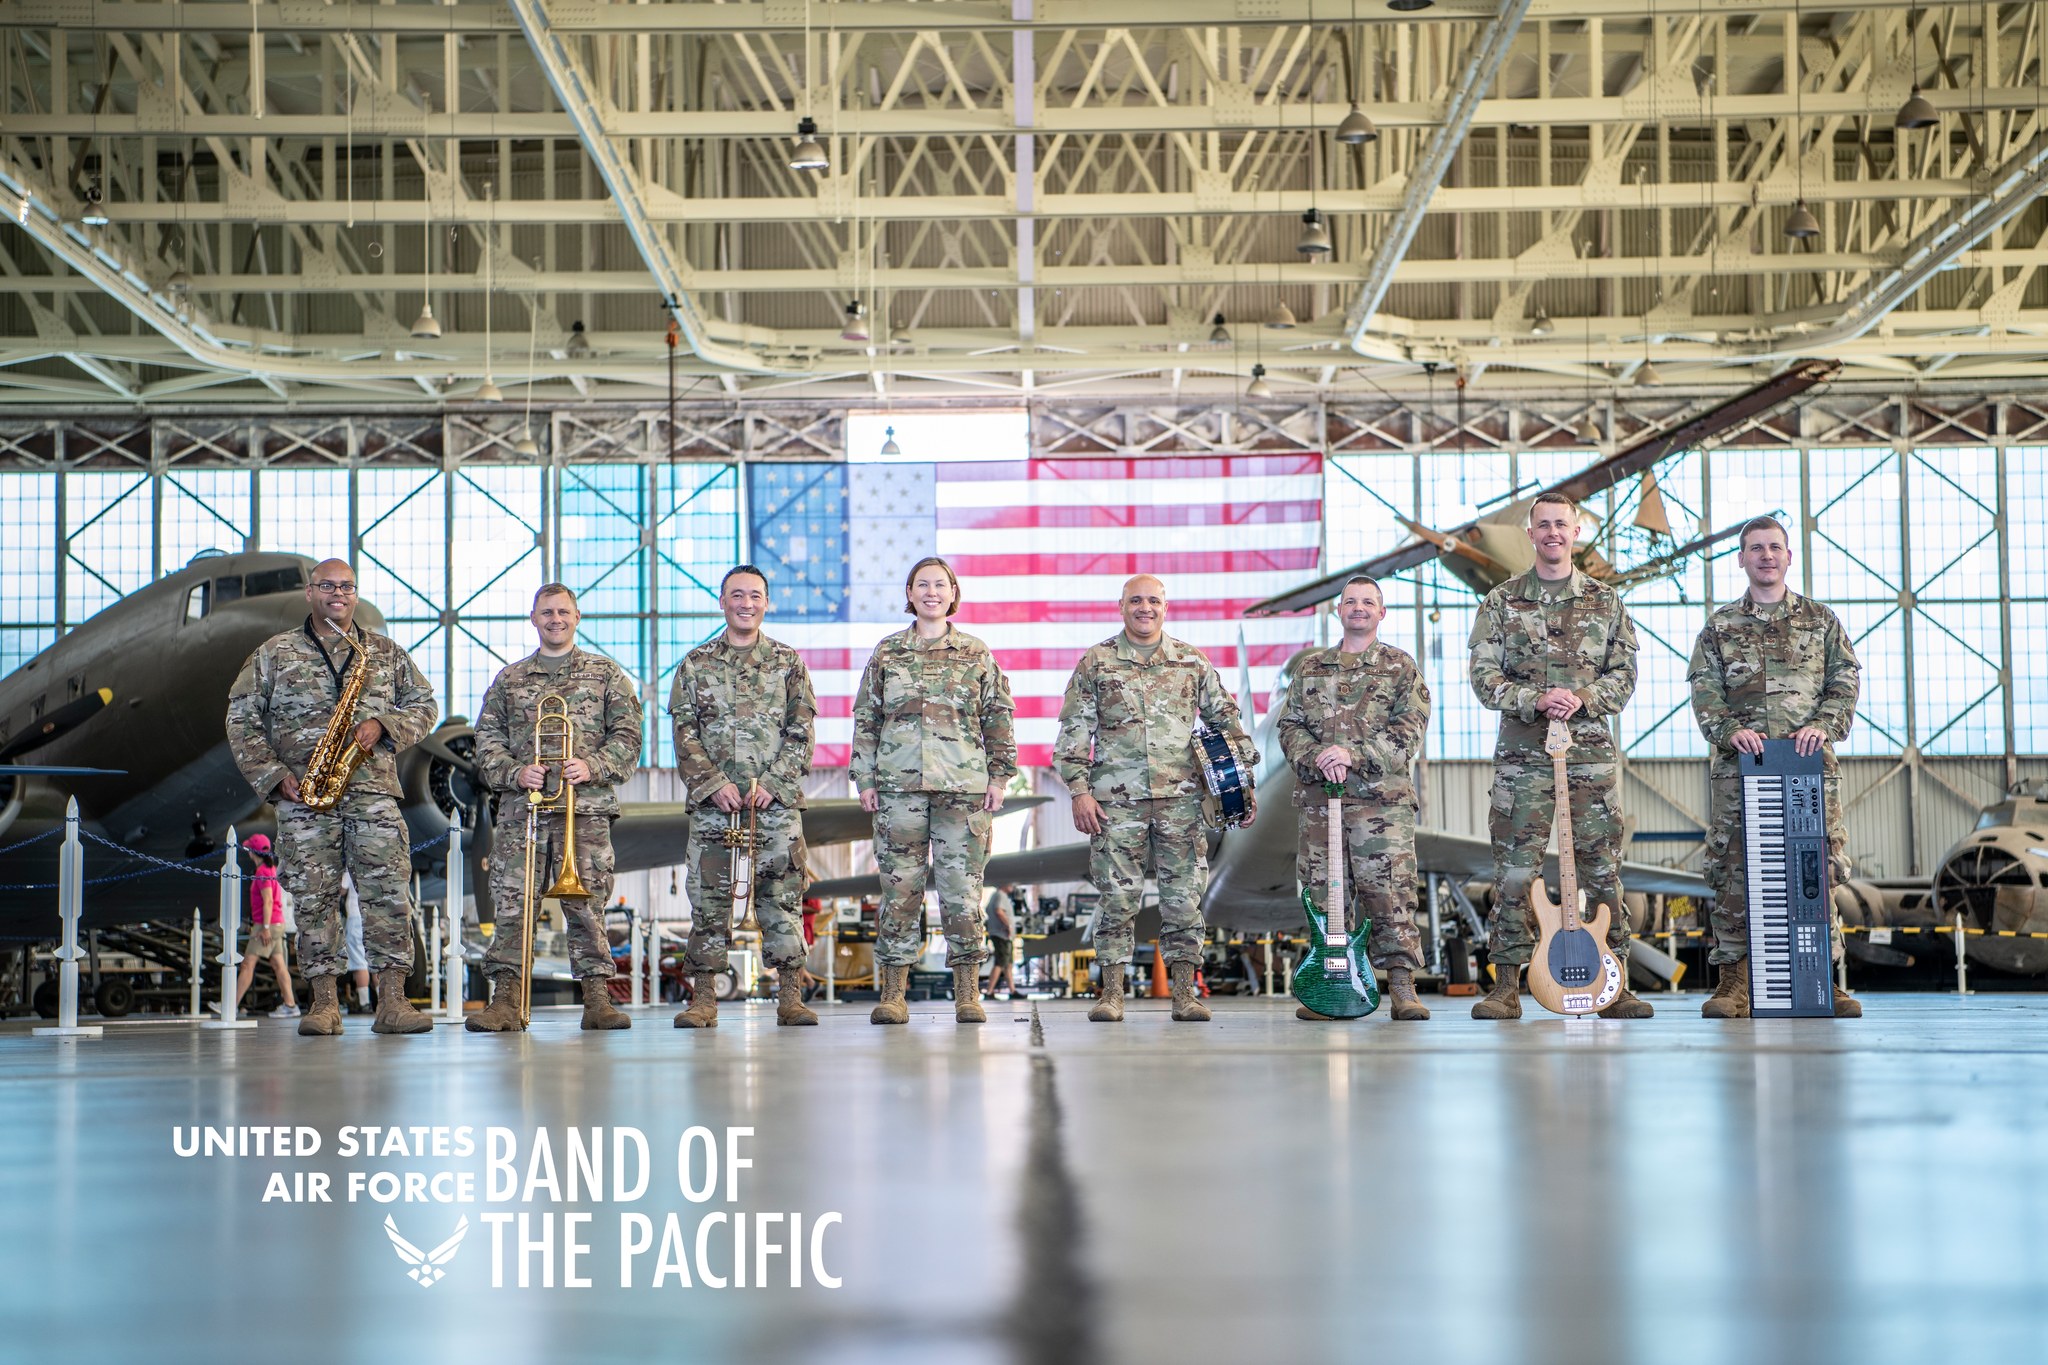 United States Air Force Band of the Pacific